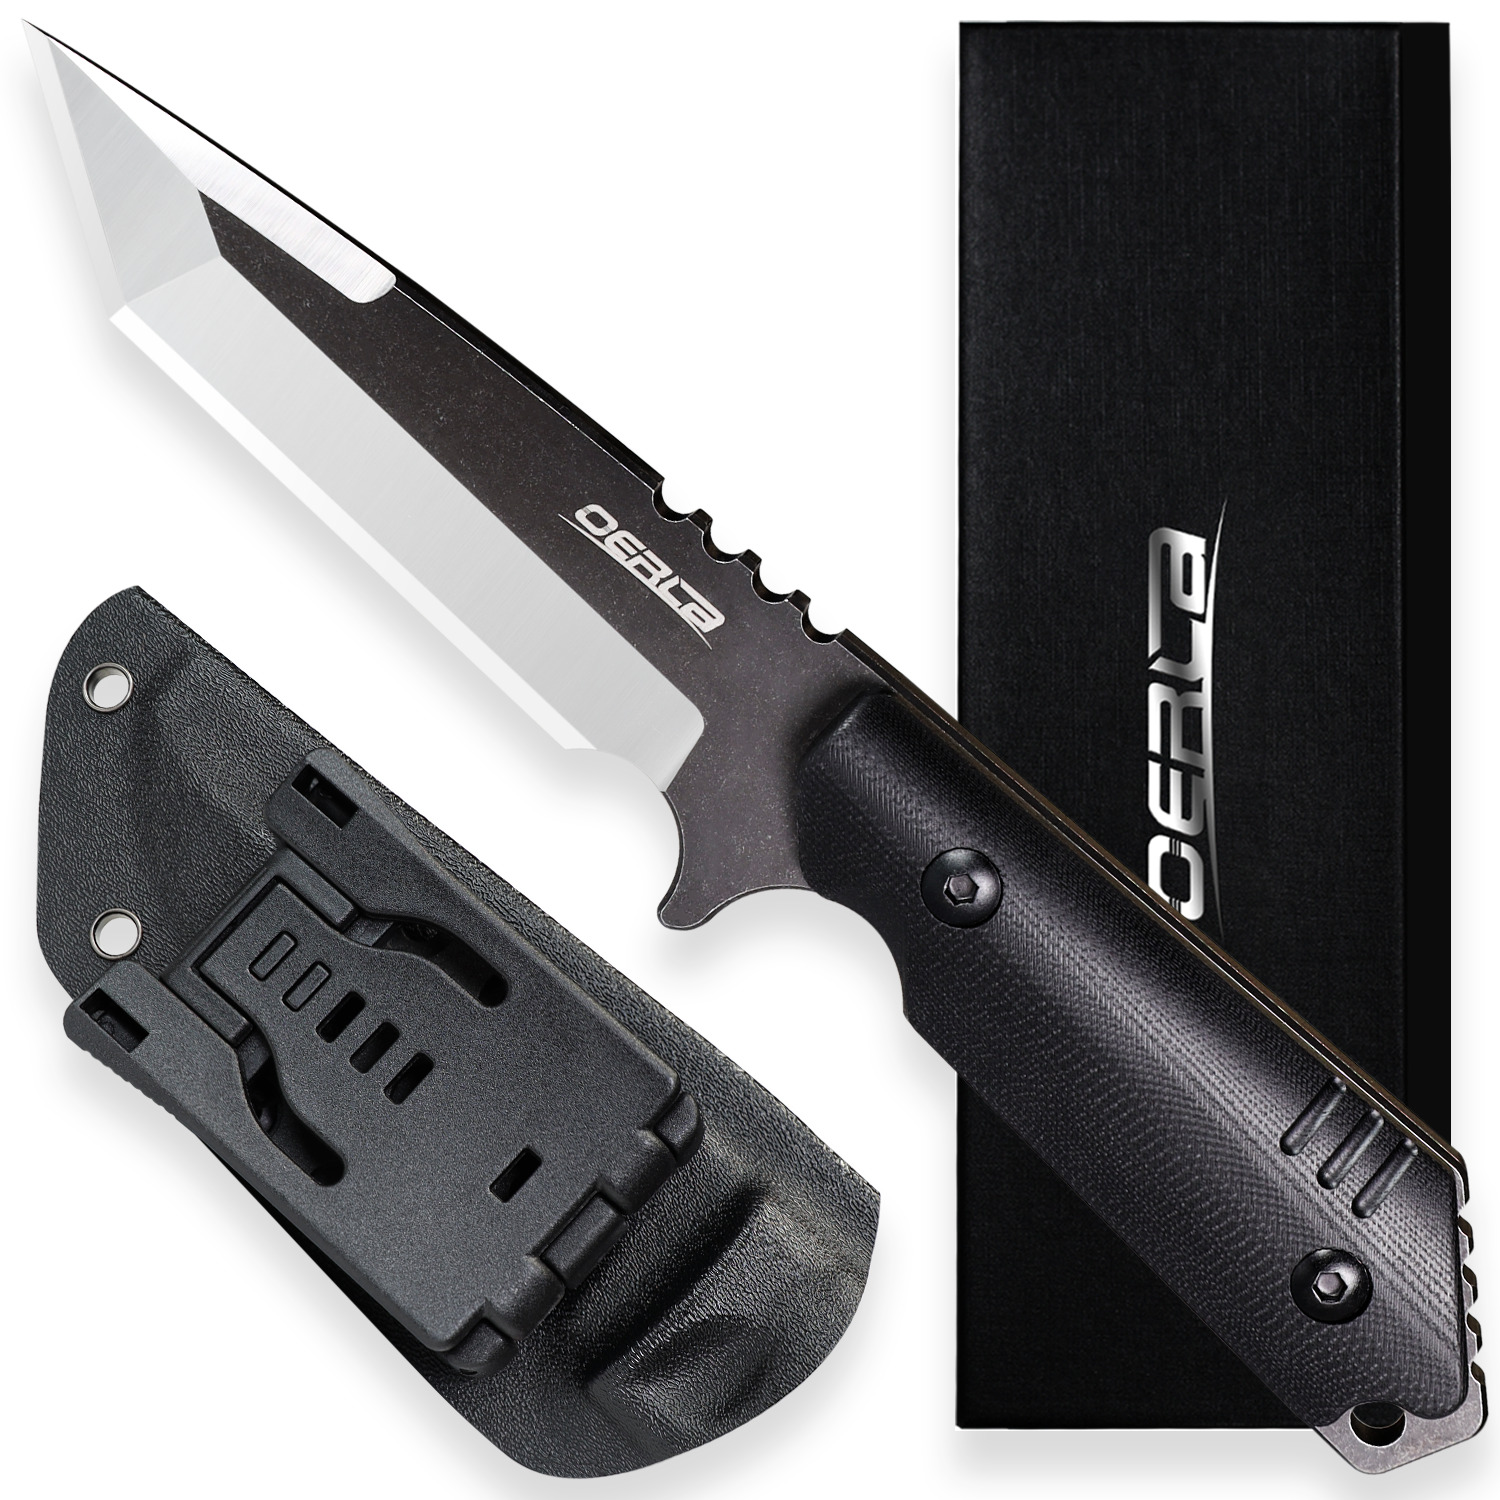 OERLA OLX-004 Tactical Knife Field Full Tang Fixed Blade Outdoor Camping Knife